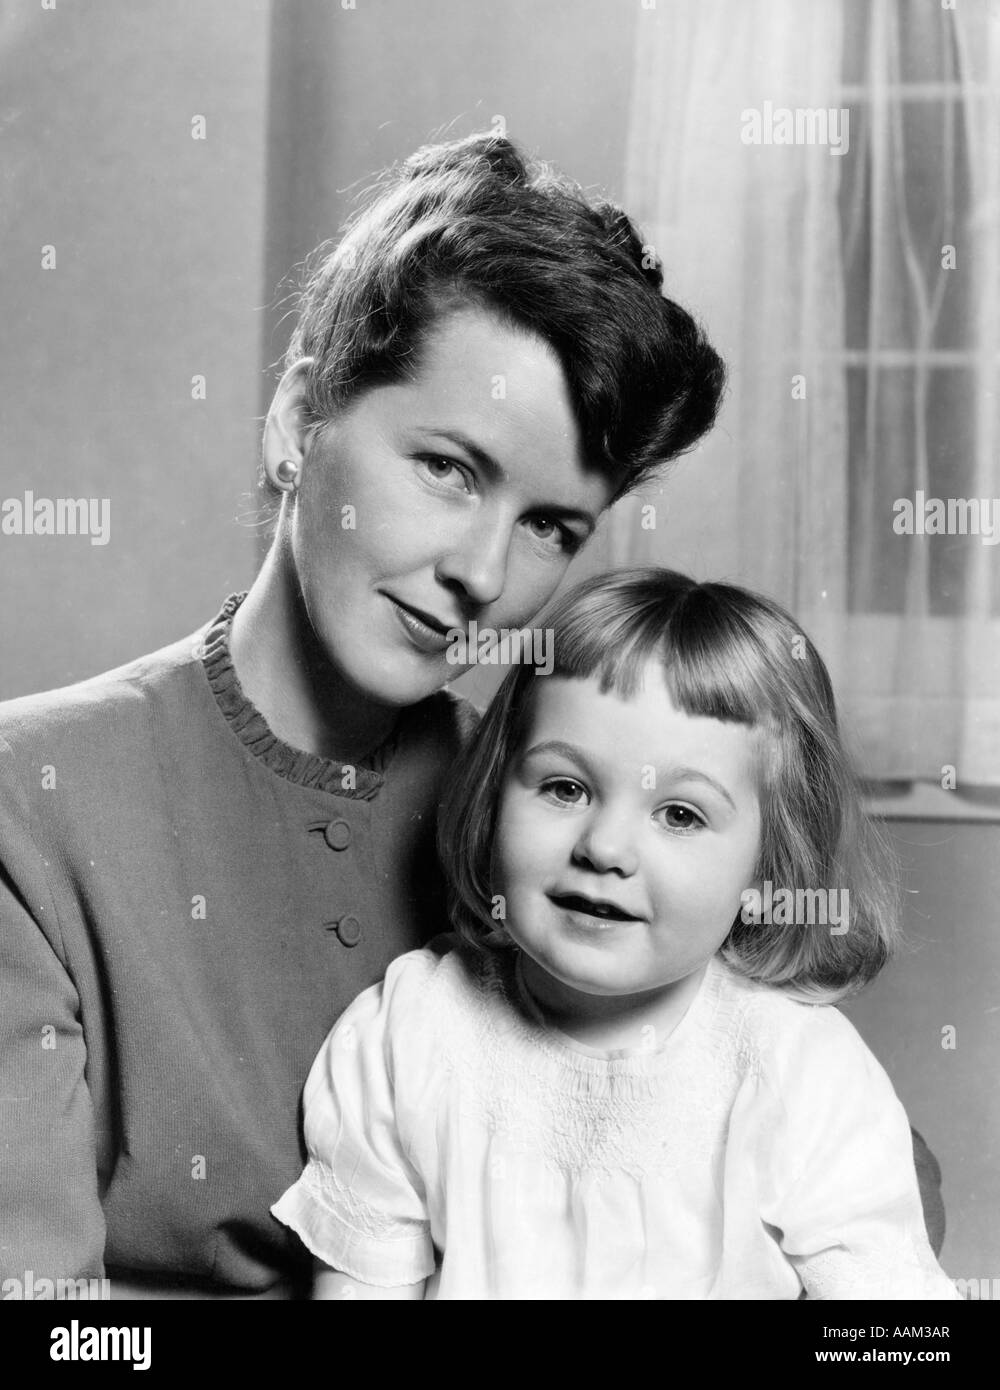 1940s 1950s PORTRAIT OF MOTHER WITH 3 YEAR OLD GIRL SITTING ON HER LAP BOTH FACING CAMERA Stock Photo